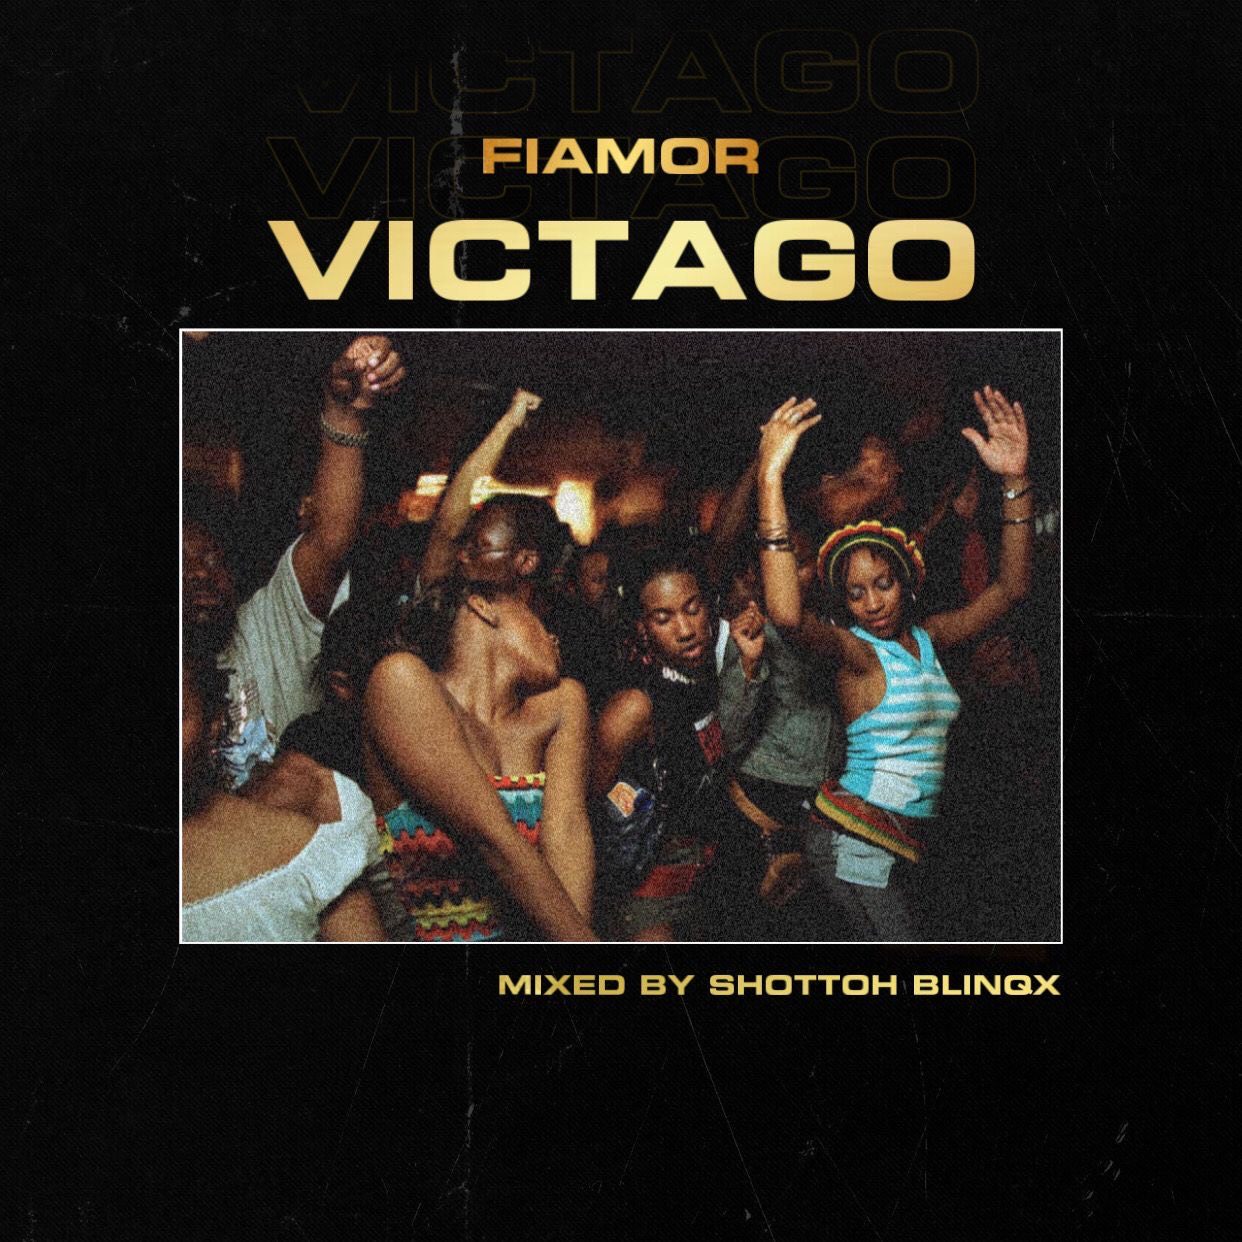 Fiamor Vitago Mixed By Shottoh